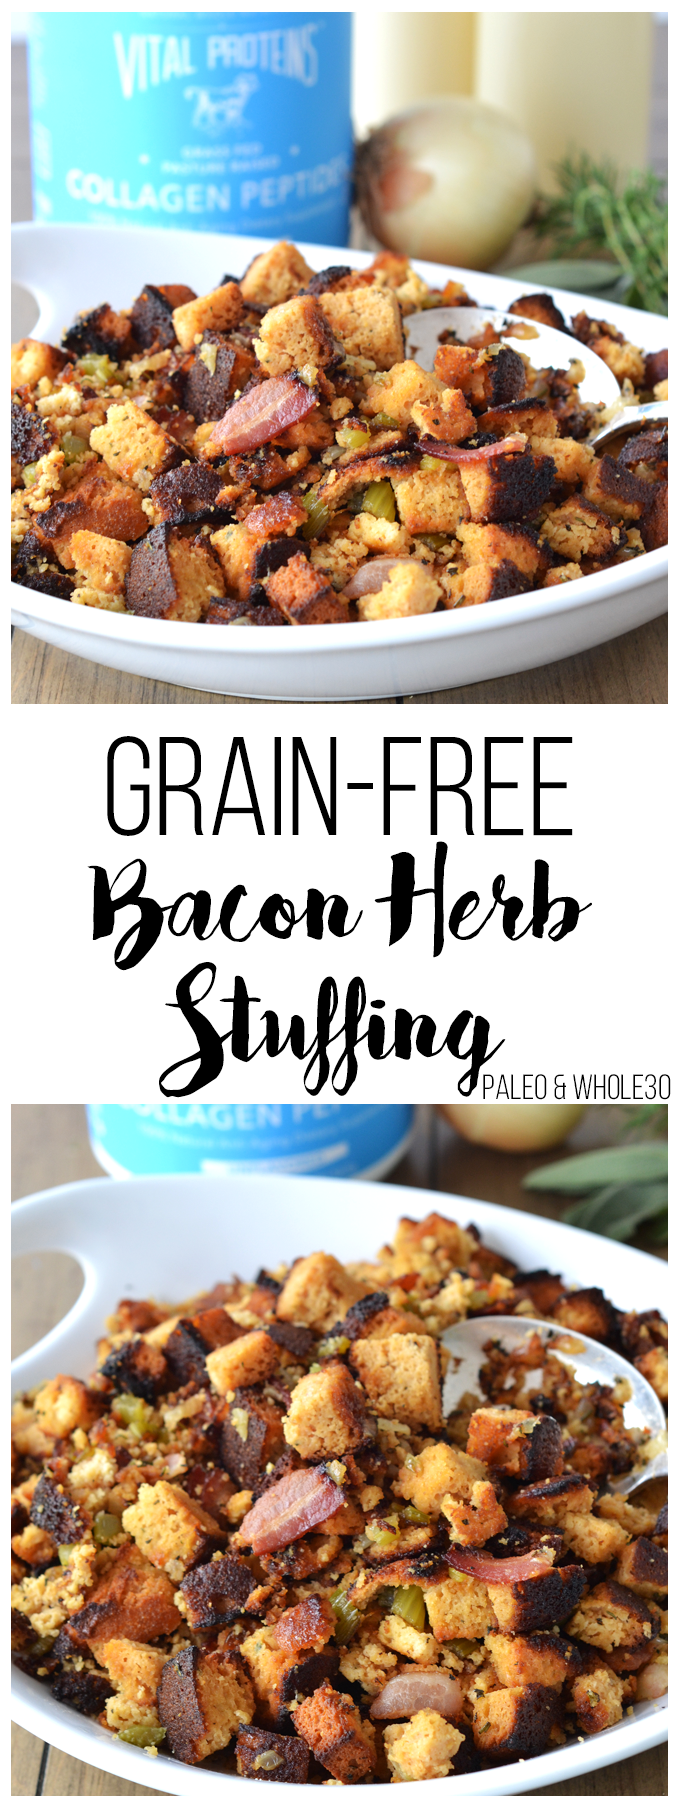 This Grain Free Bacon Herb Stuffing is a great paleo & whole30 stuffing option for thanksgiving!